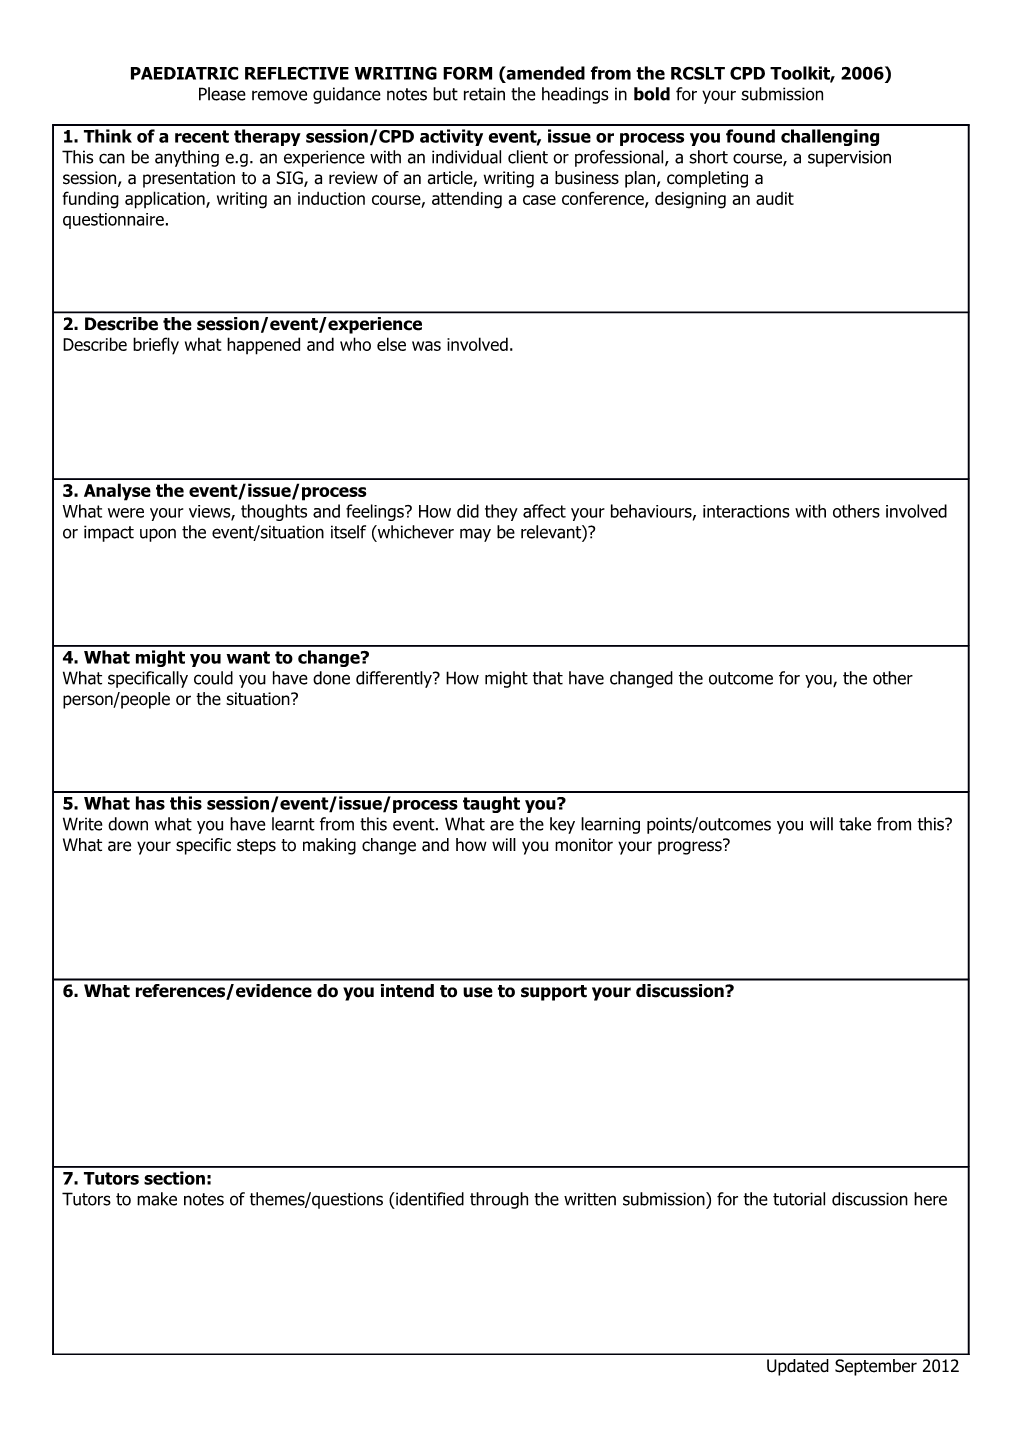 PAEDIATRIC REFLECTIVE WRITING FORM (Amended from the RCSLT CPD Toolkit, 2006)